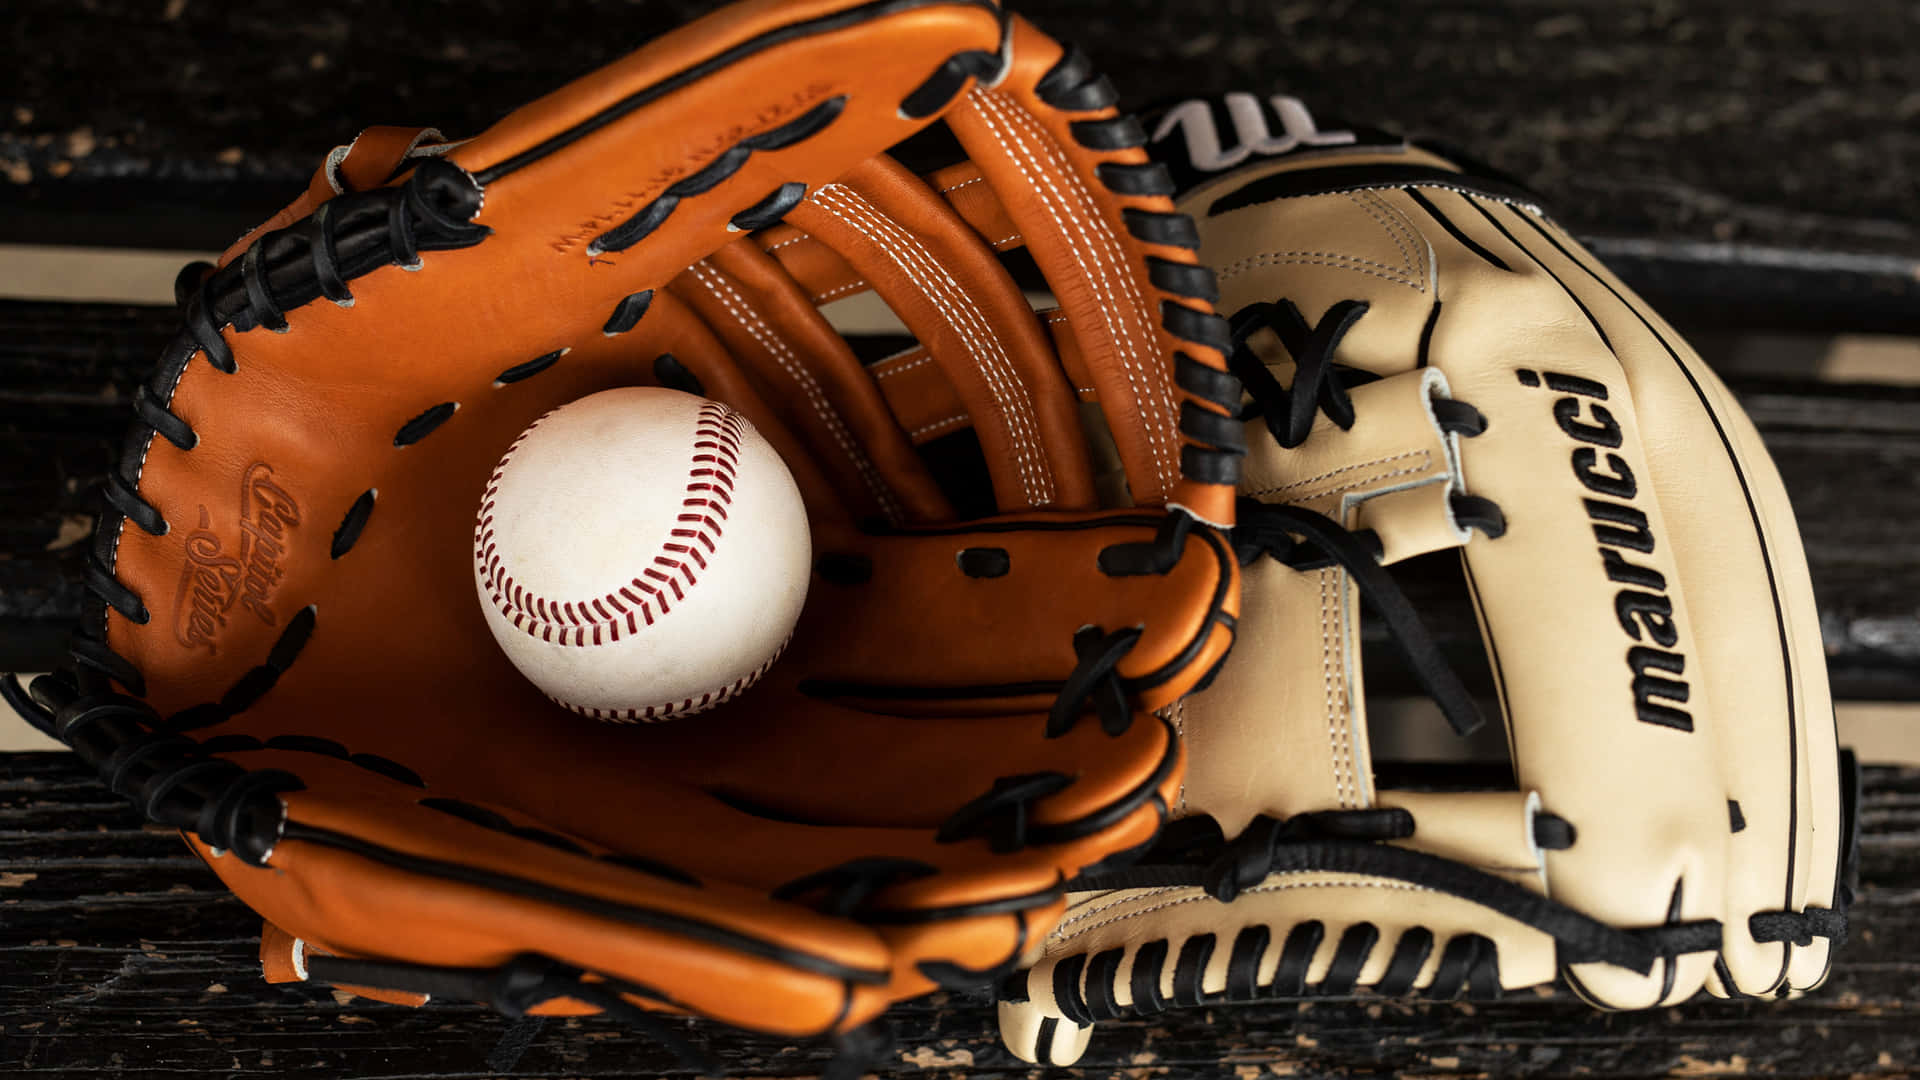 Athlete getting ready for the catch with a leather baseball glove Wallpaper